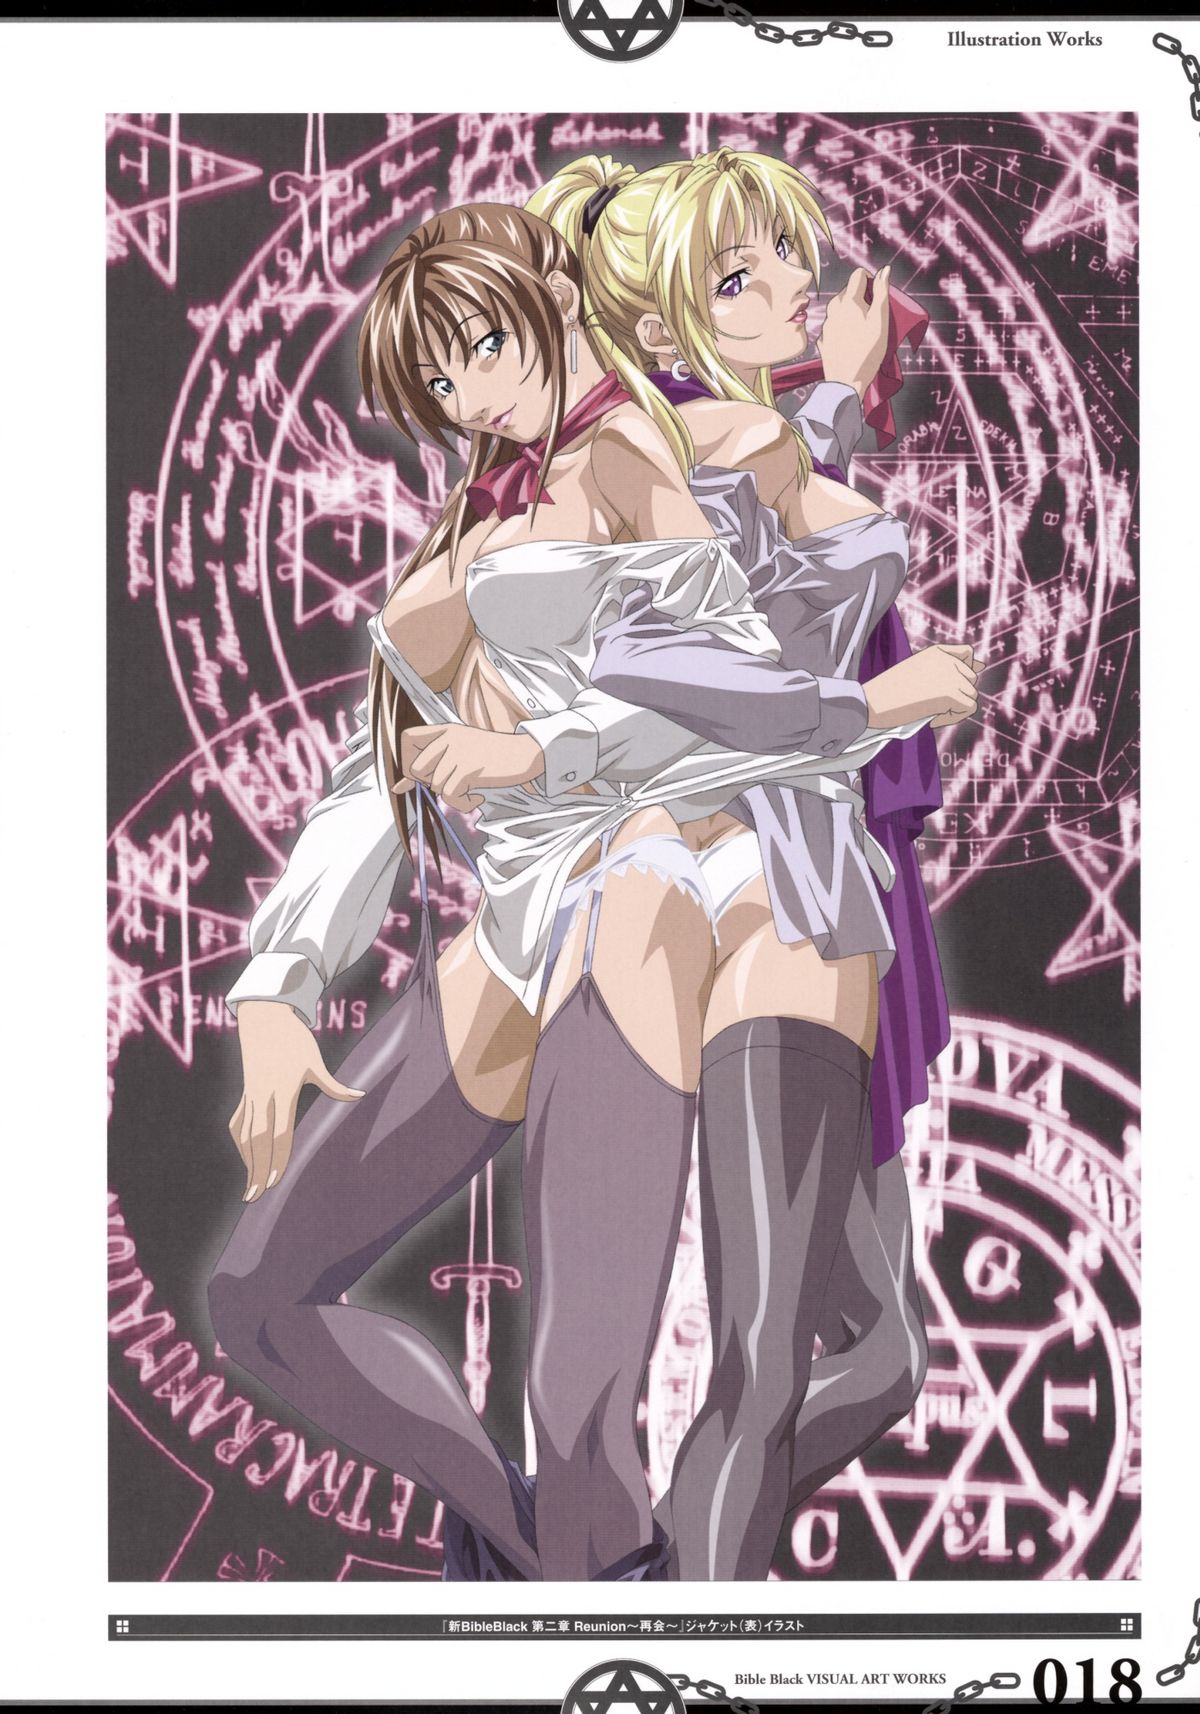 The Bible Black Visual Art Works page 25 full